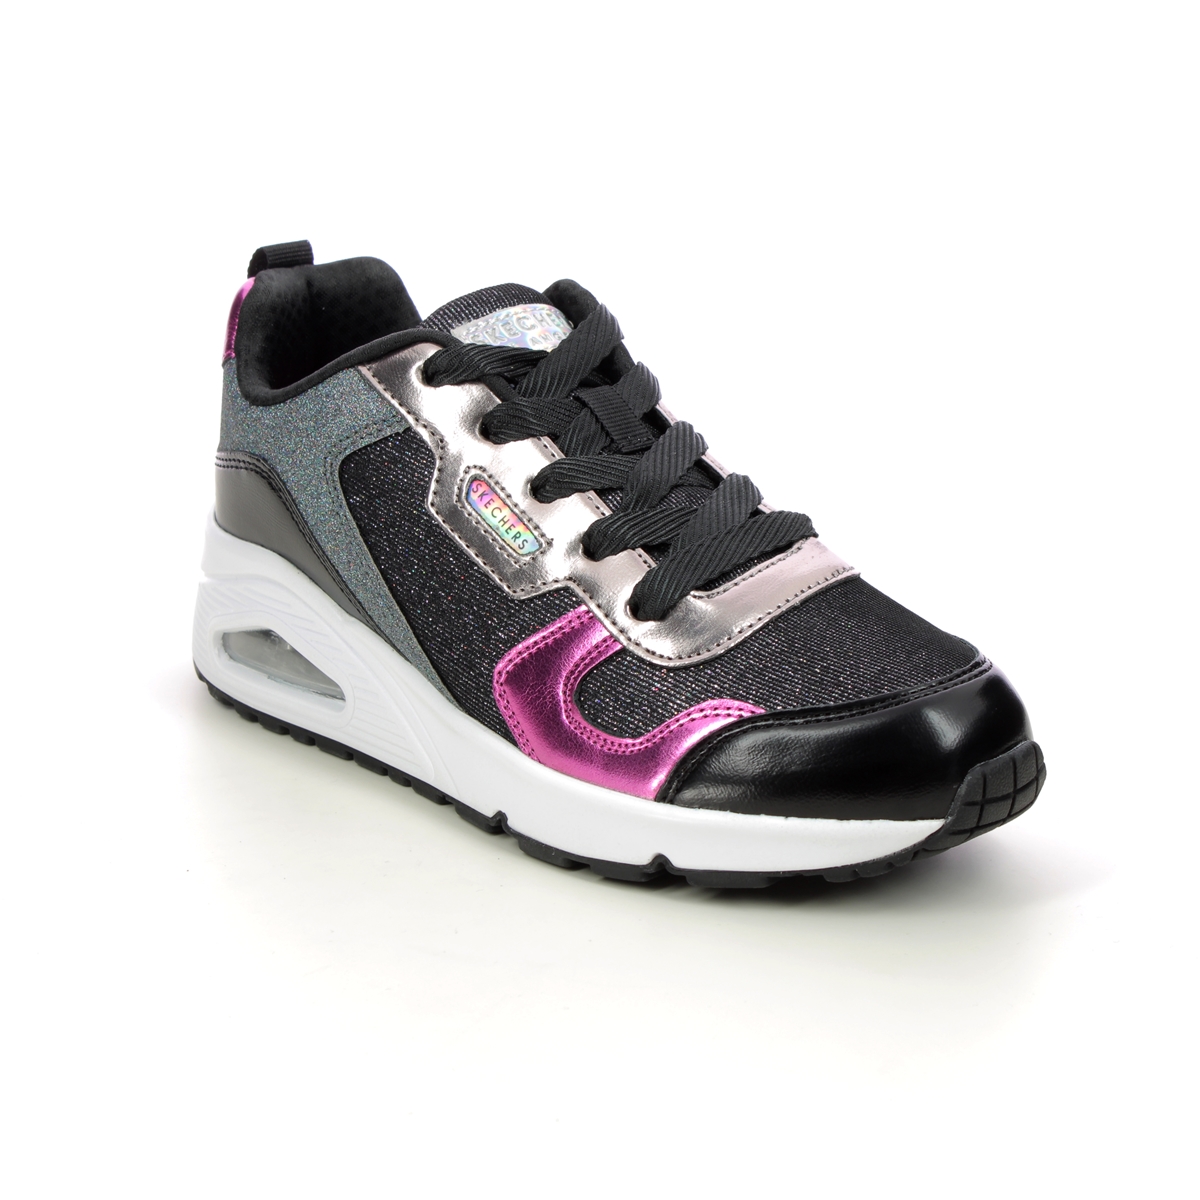 Skechers Uno Remix Lace Black Kids Girls Trainers 310513L In Size 34 In Plain Black For kids